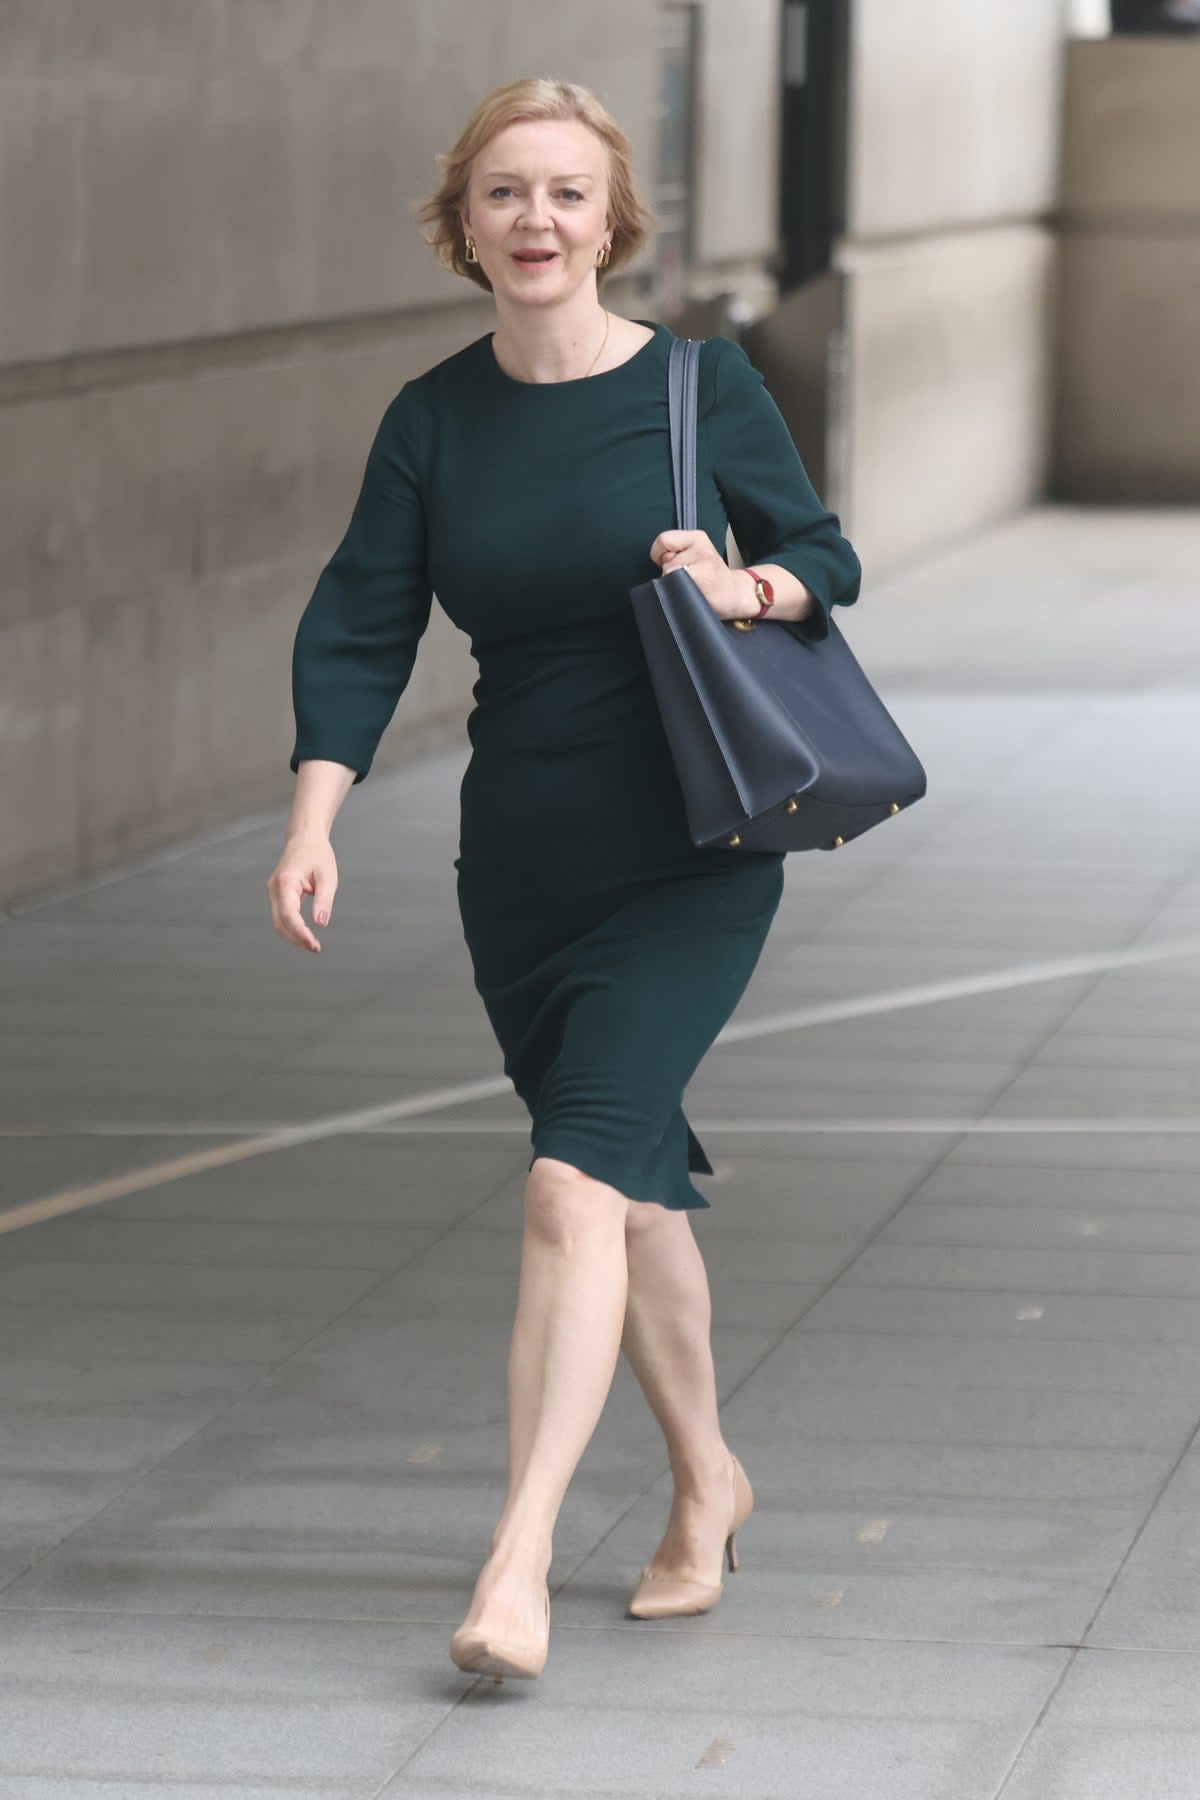 Liz Truss has been tipped to become the next prime minister (James Manning/PA) (PA Wire)